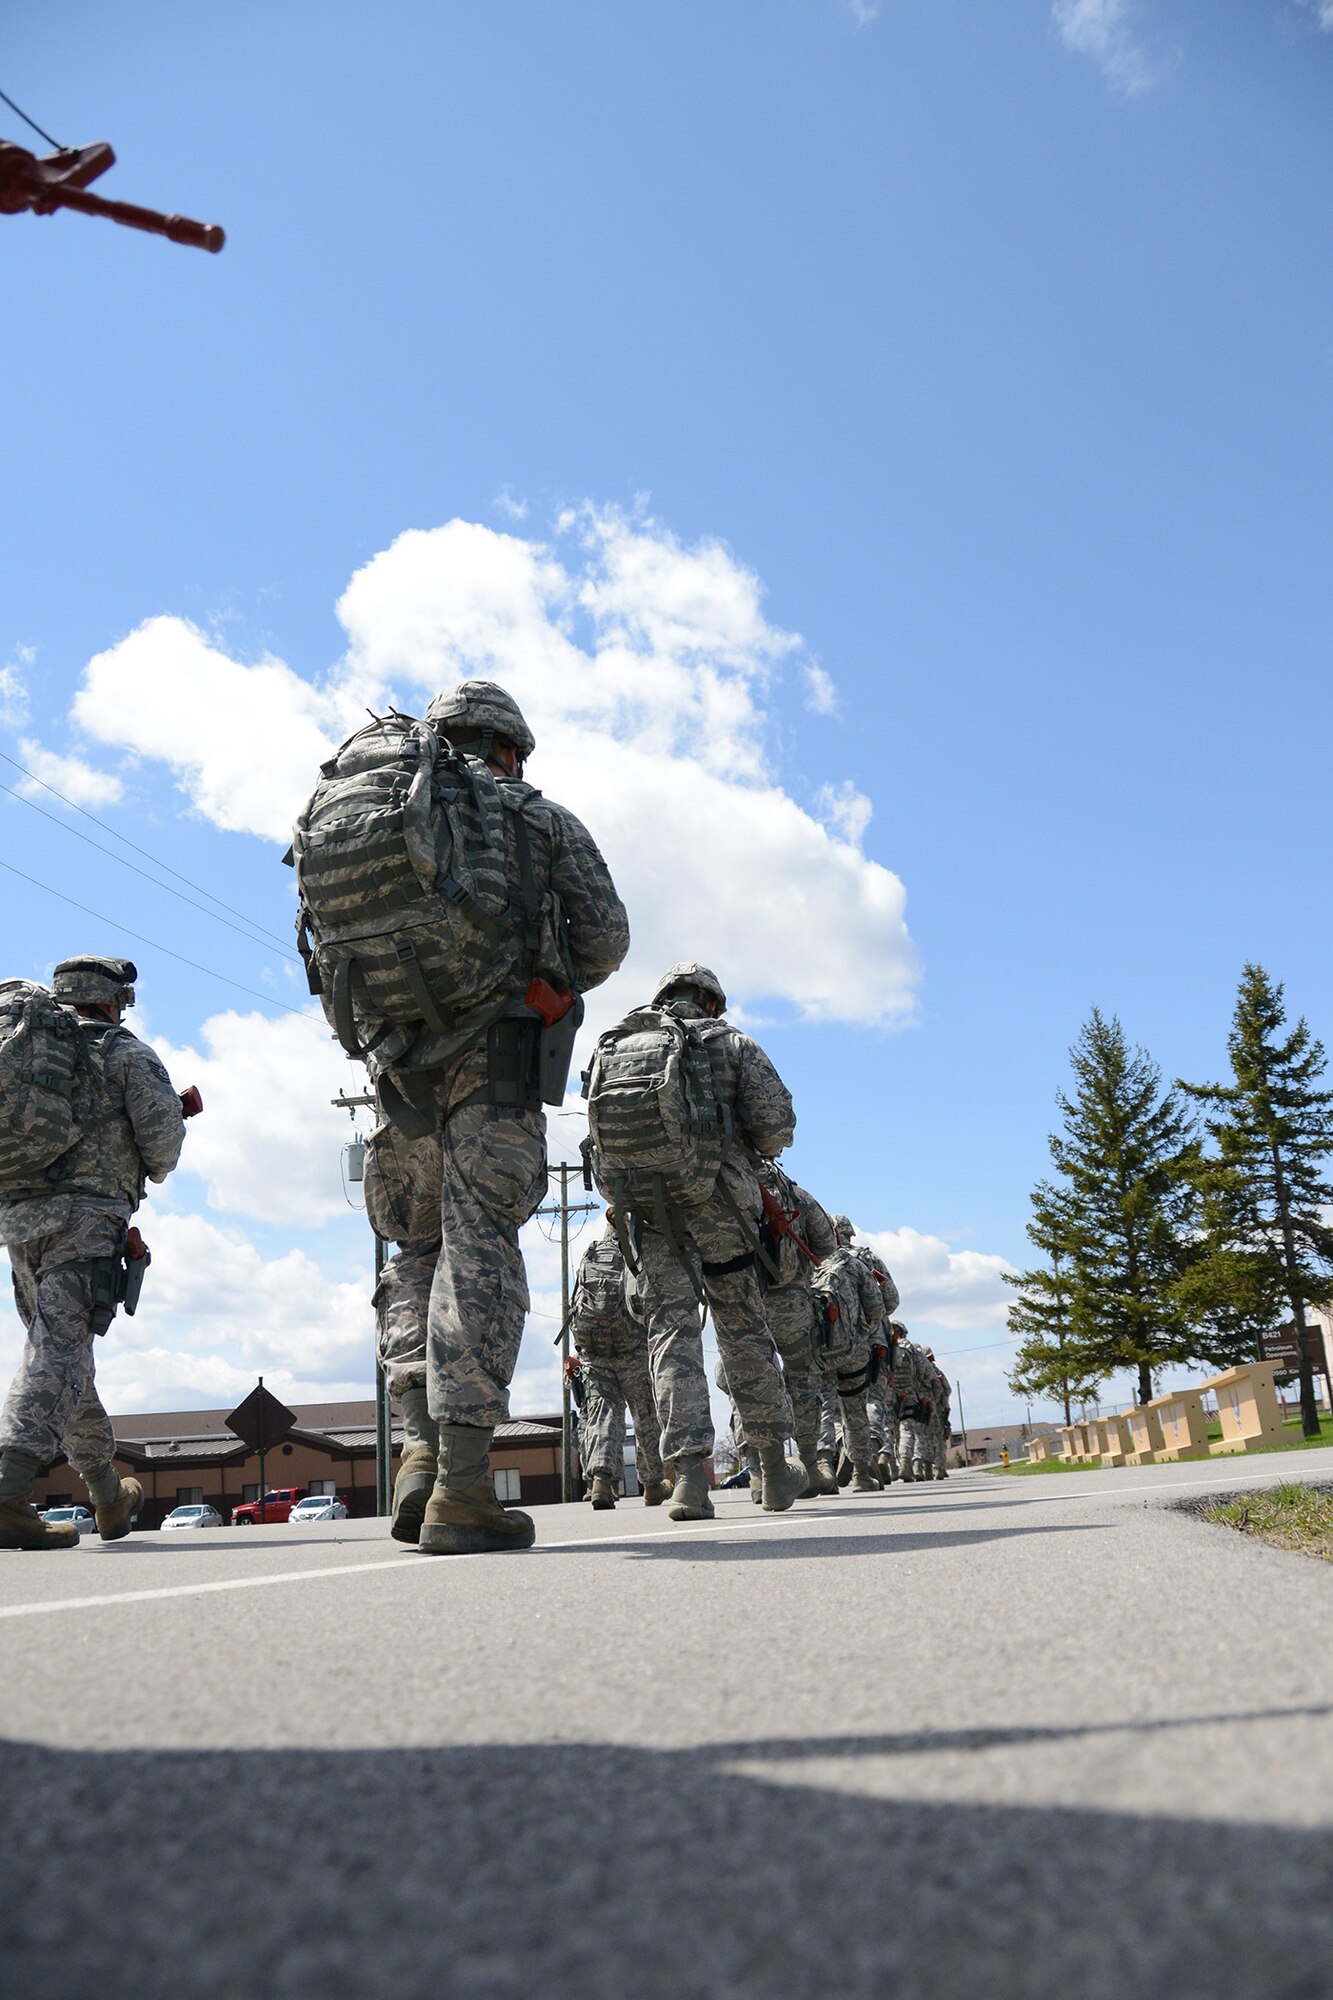 Airmen of the 914th Airlift Wing's Security Forces Squadron participate in a three-mile ruck march during the May Unit Training Assembly, May 3, 2014 at the Niagara Falls Air Reserve Station, N.Y.  The Airmen, each carrying more than 50 pounds of gear, complete morale marches like this quarterly.  (U.S. Air Force photo by Tech. Sgt. Andrew Caya)